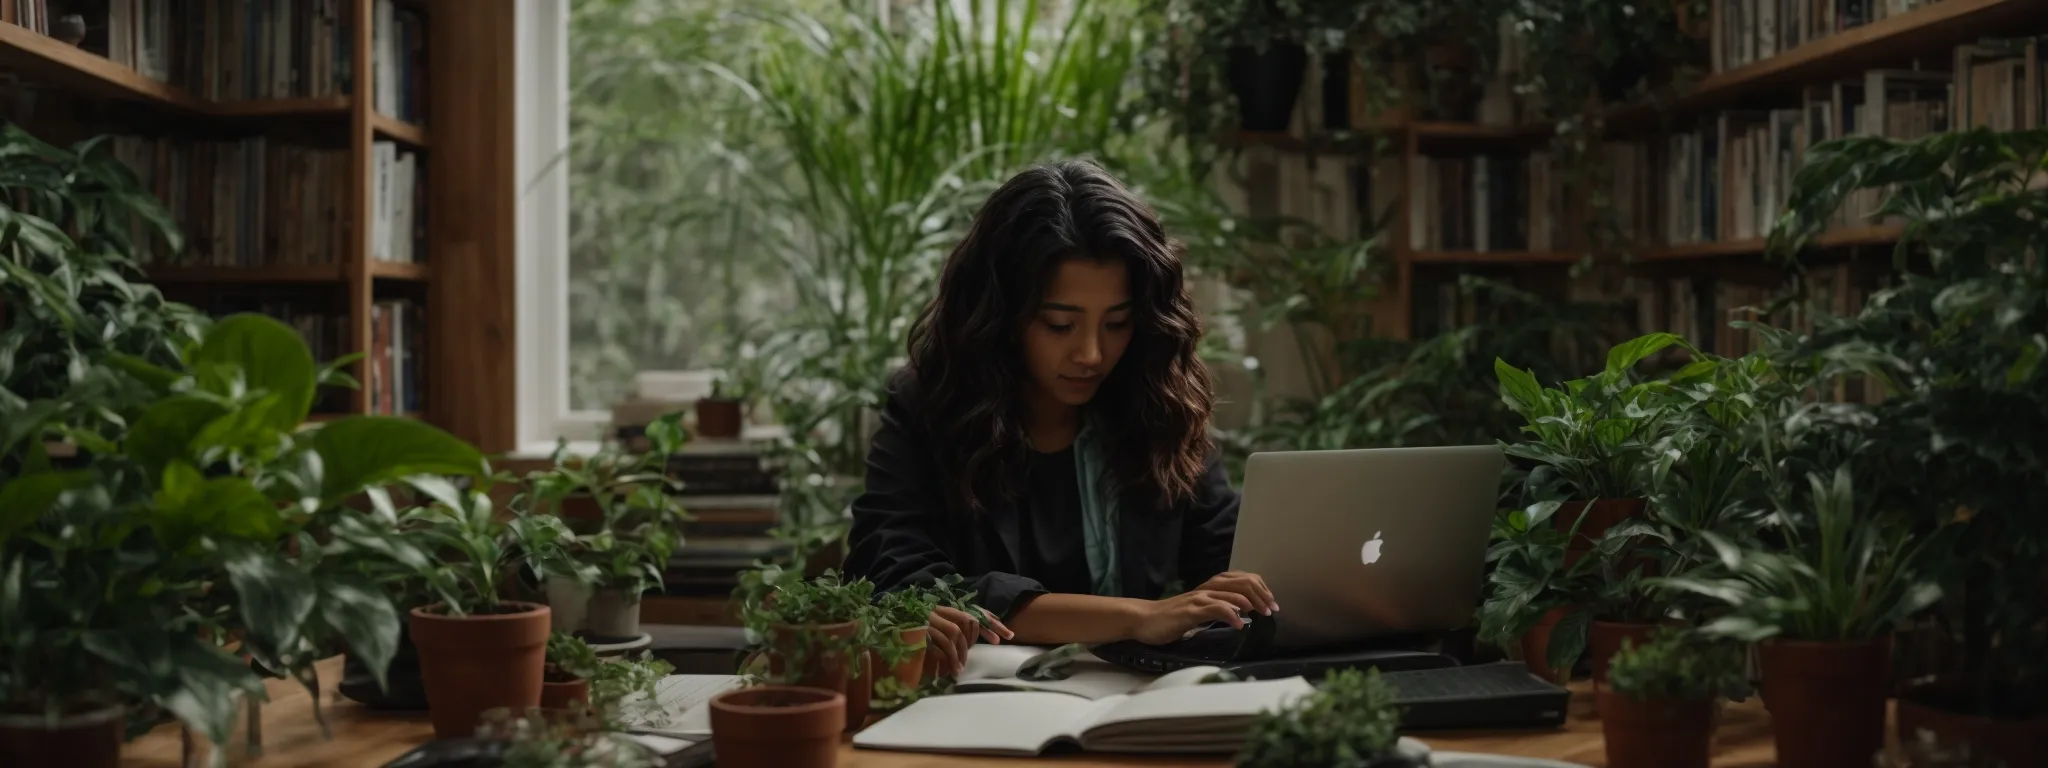 a person types on a laptop surrounded by books and plants, symbolizing the blend of research and content creation.